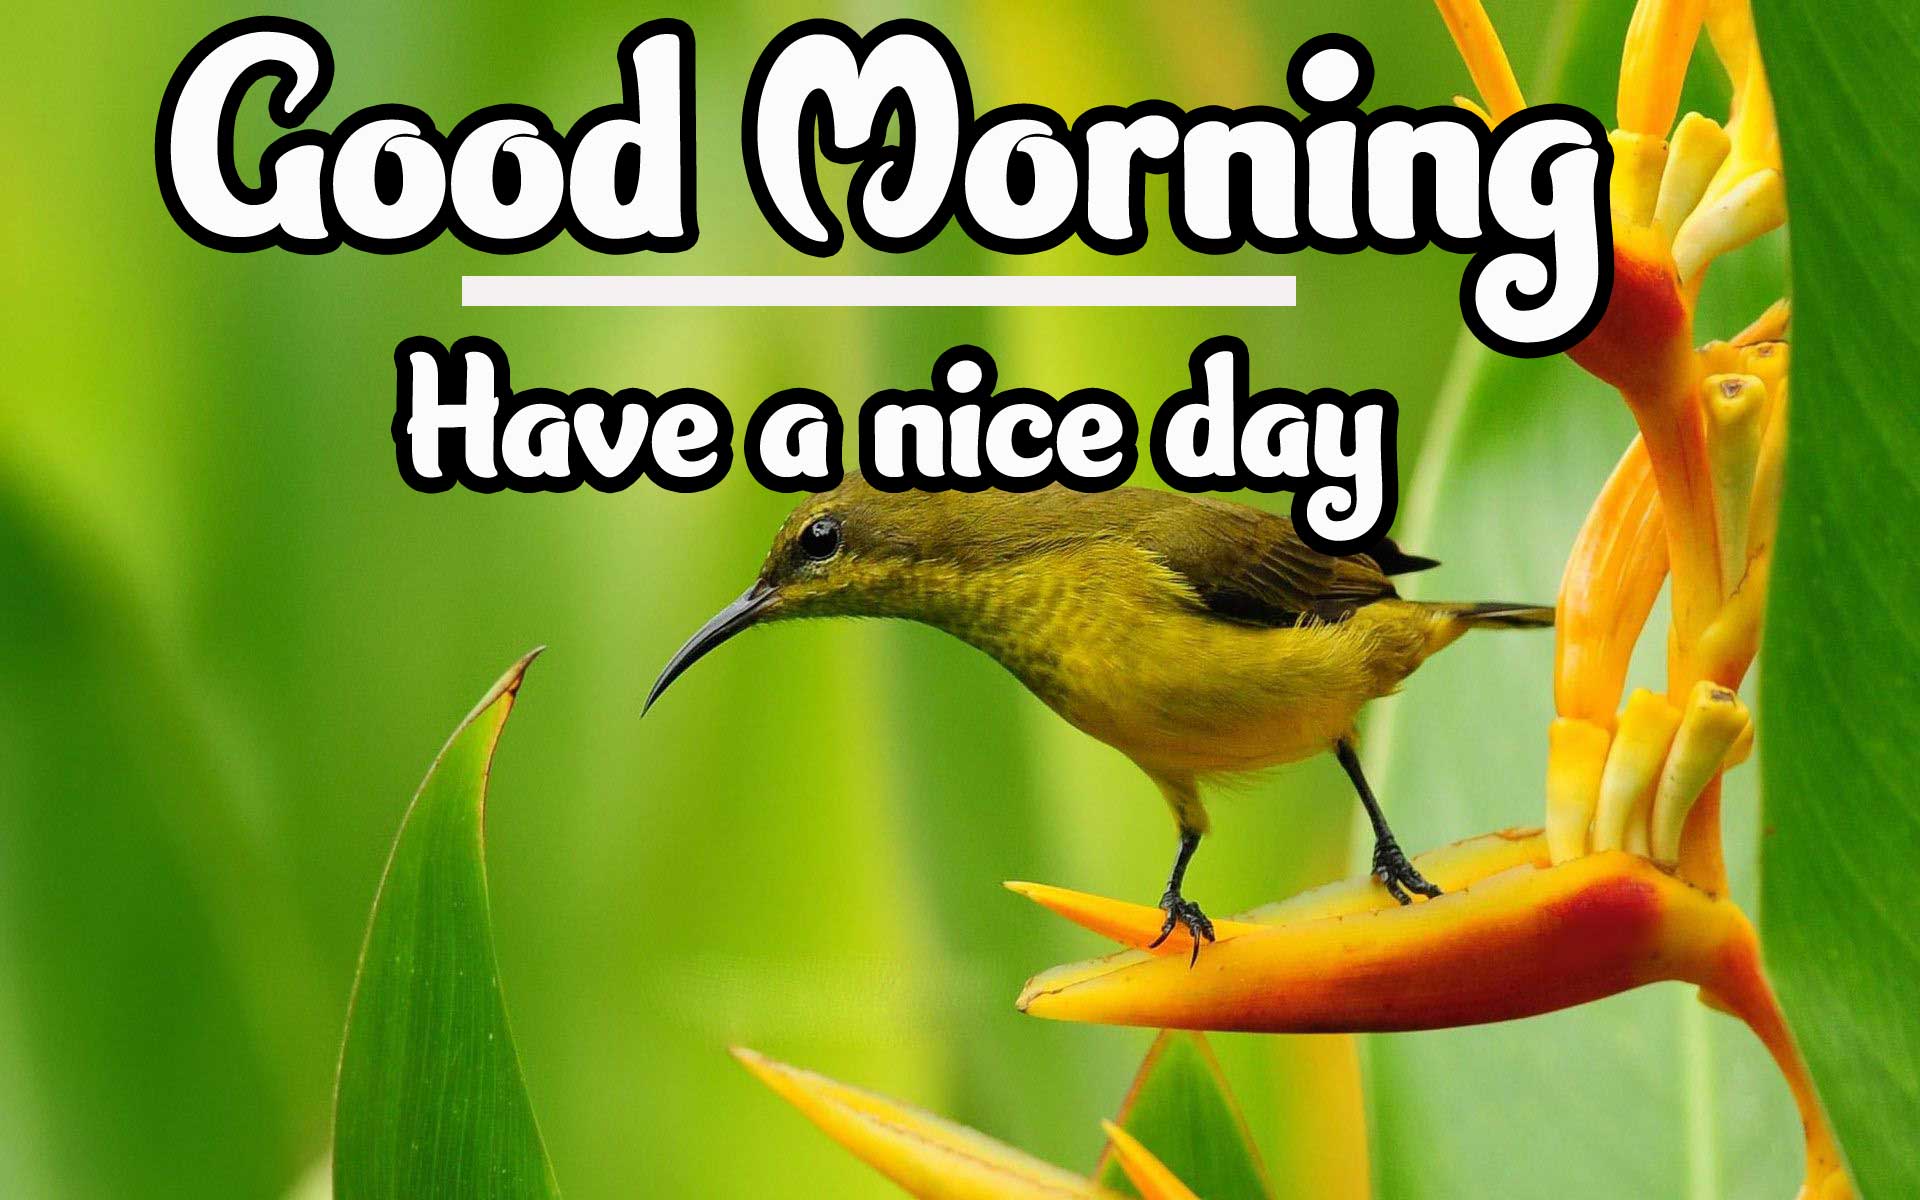 Beautiful Good Morning Wishes Images Pics Wallpaper Free Download 